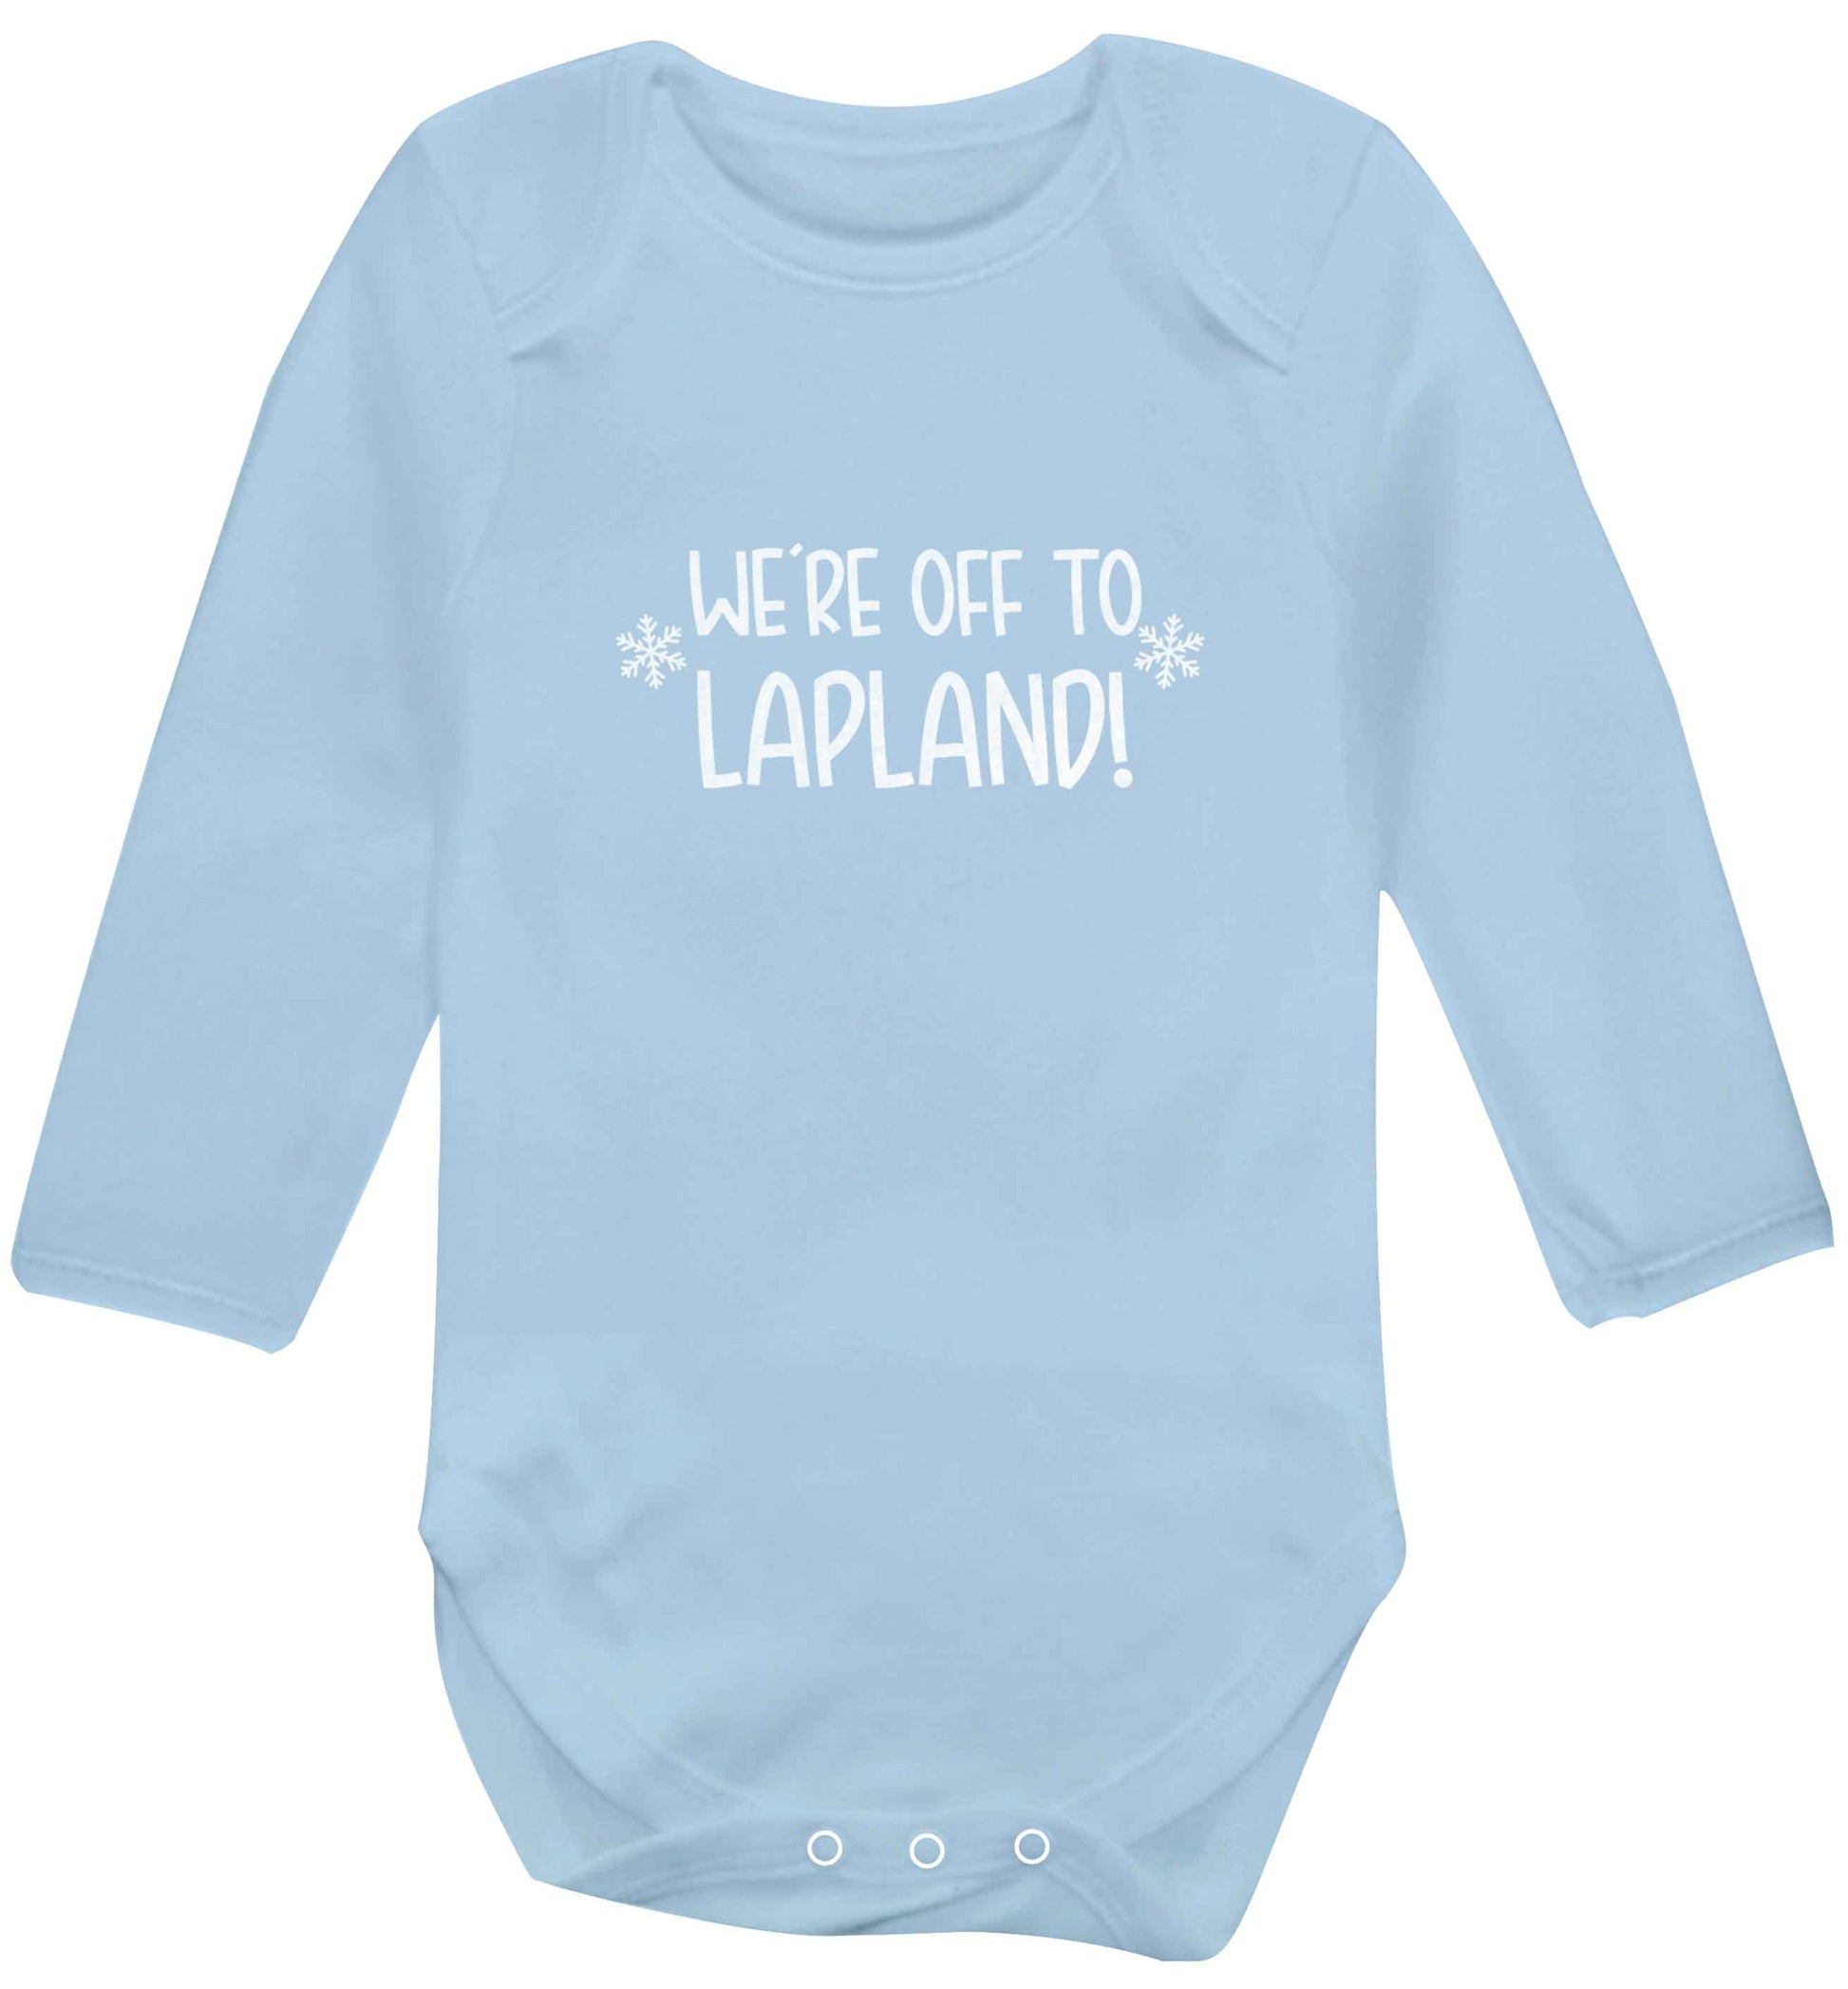 We're off to Lapland baby vest long sleeved pale blue 6-12 months